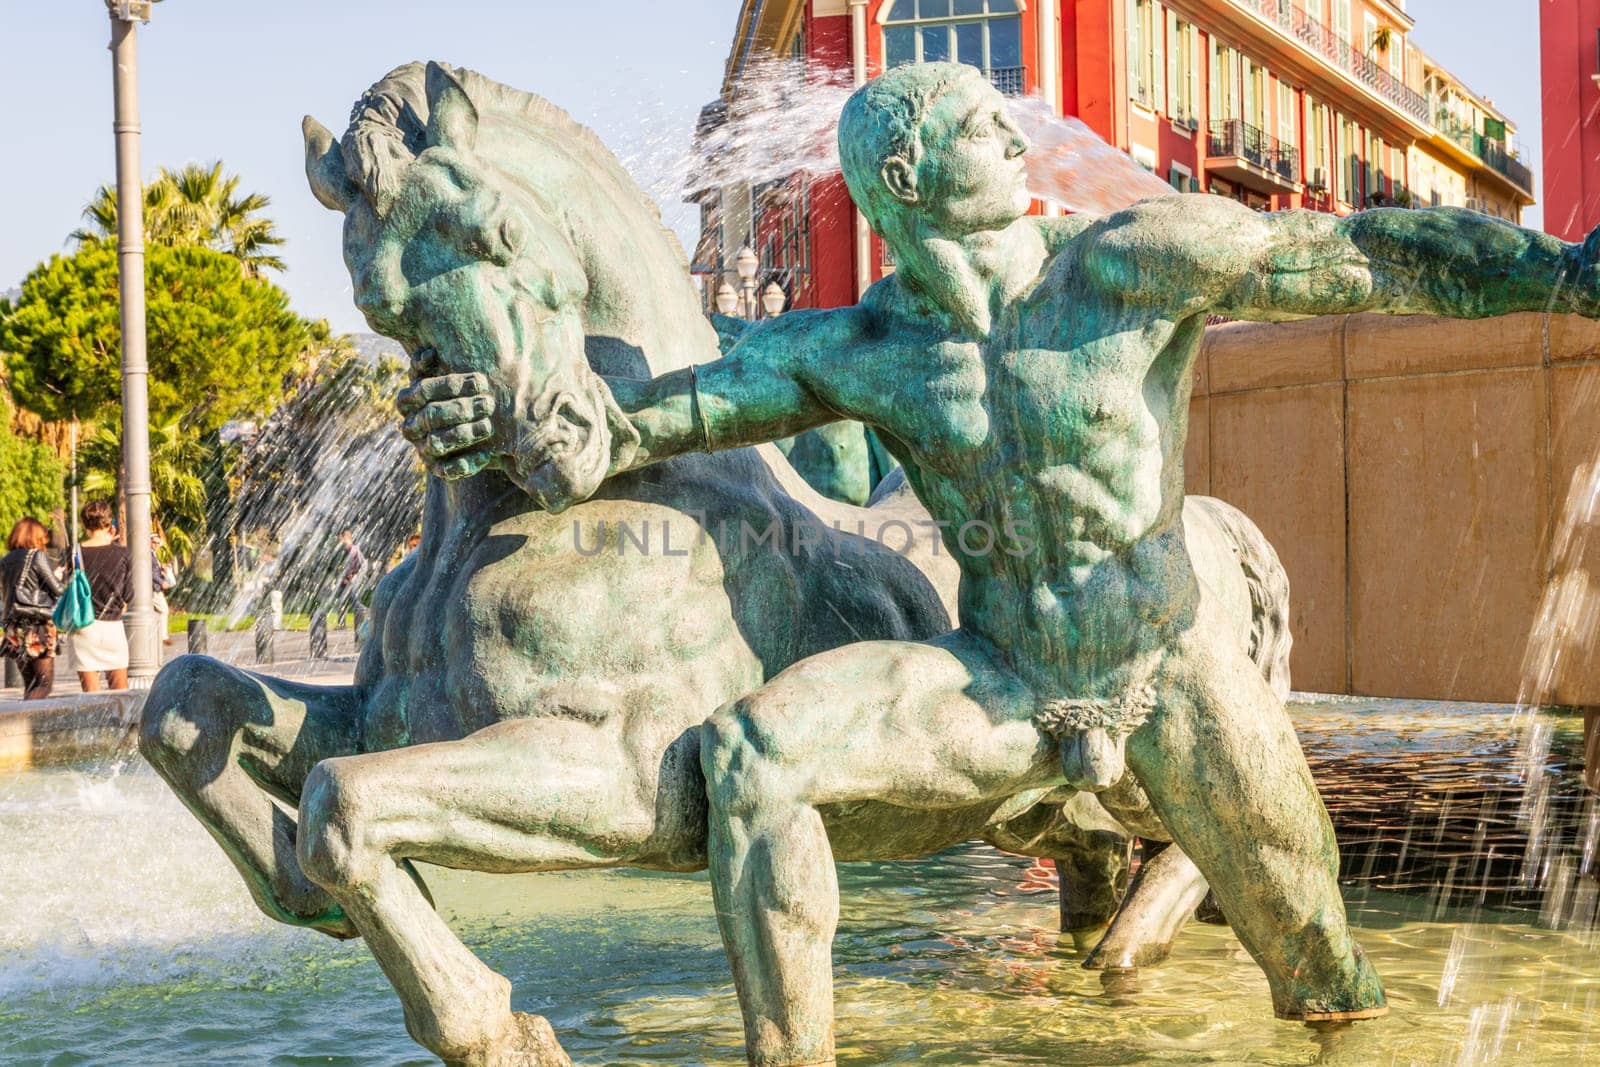 Fountain Soleil on Place Massena in Nice by vladispas